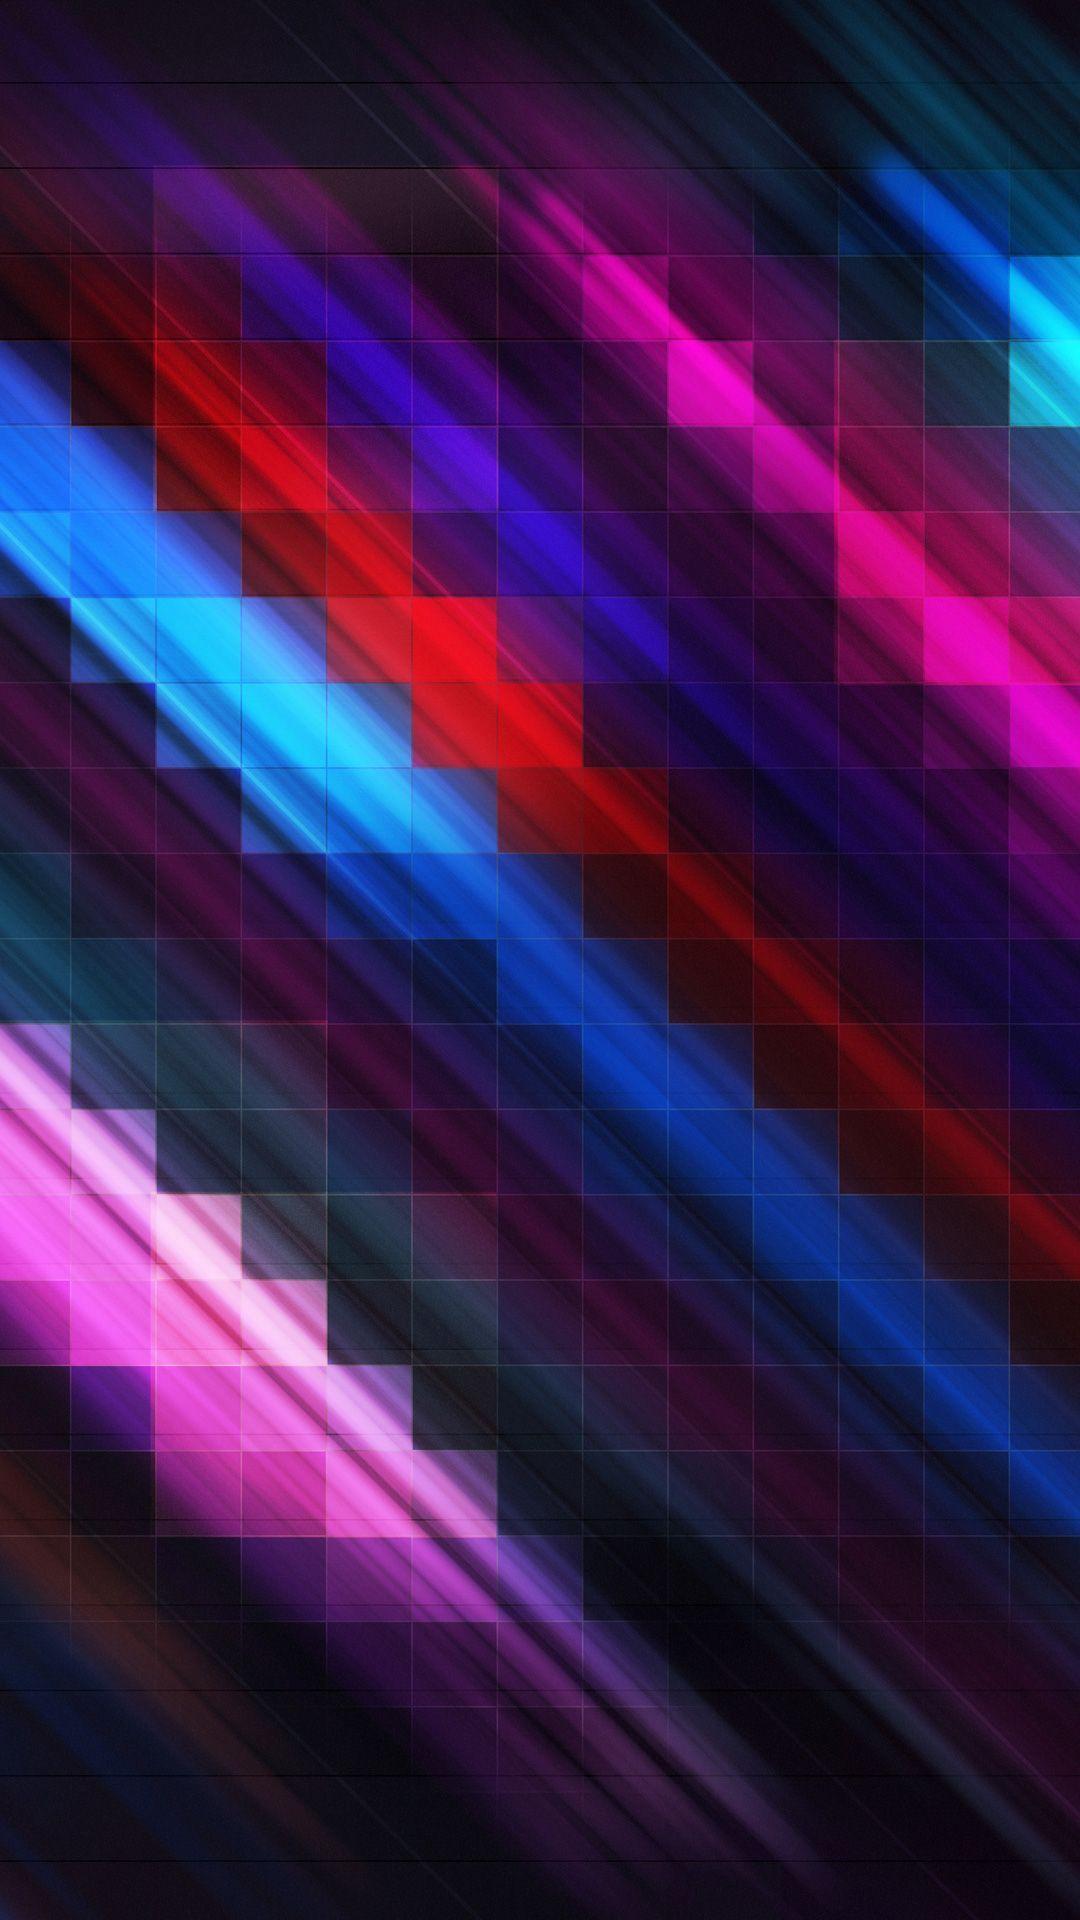 Abstract HD Wallpaper For Phone